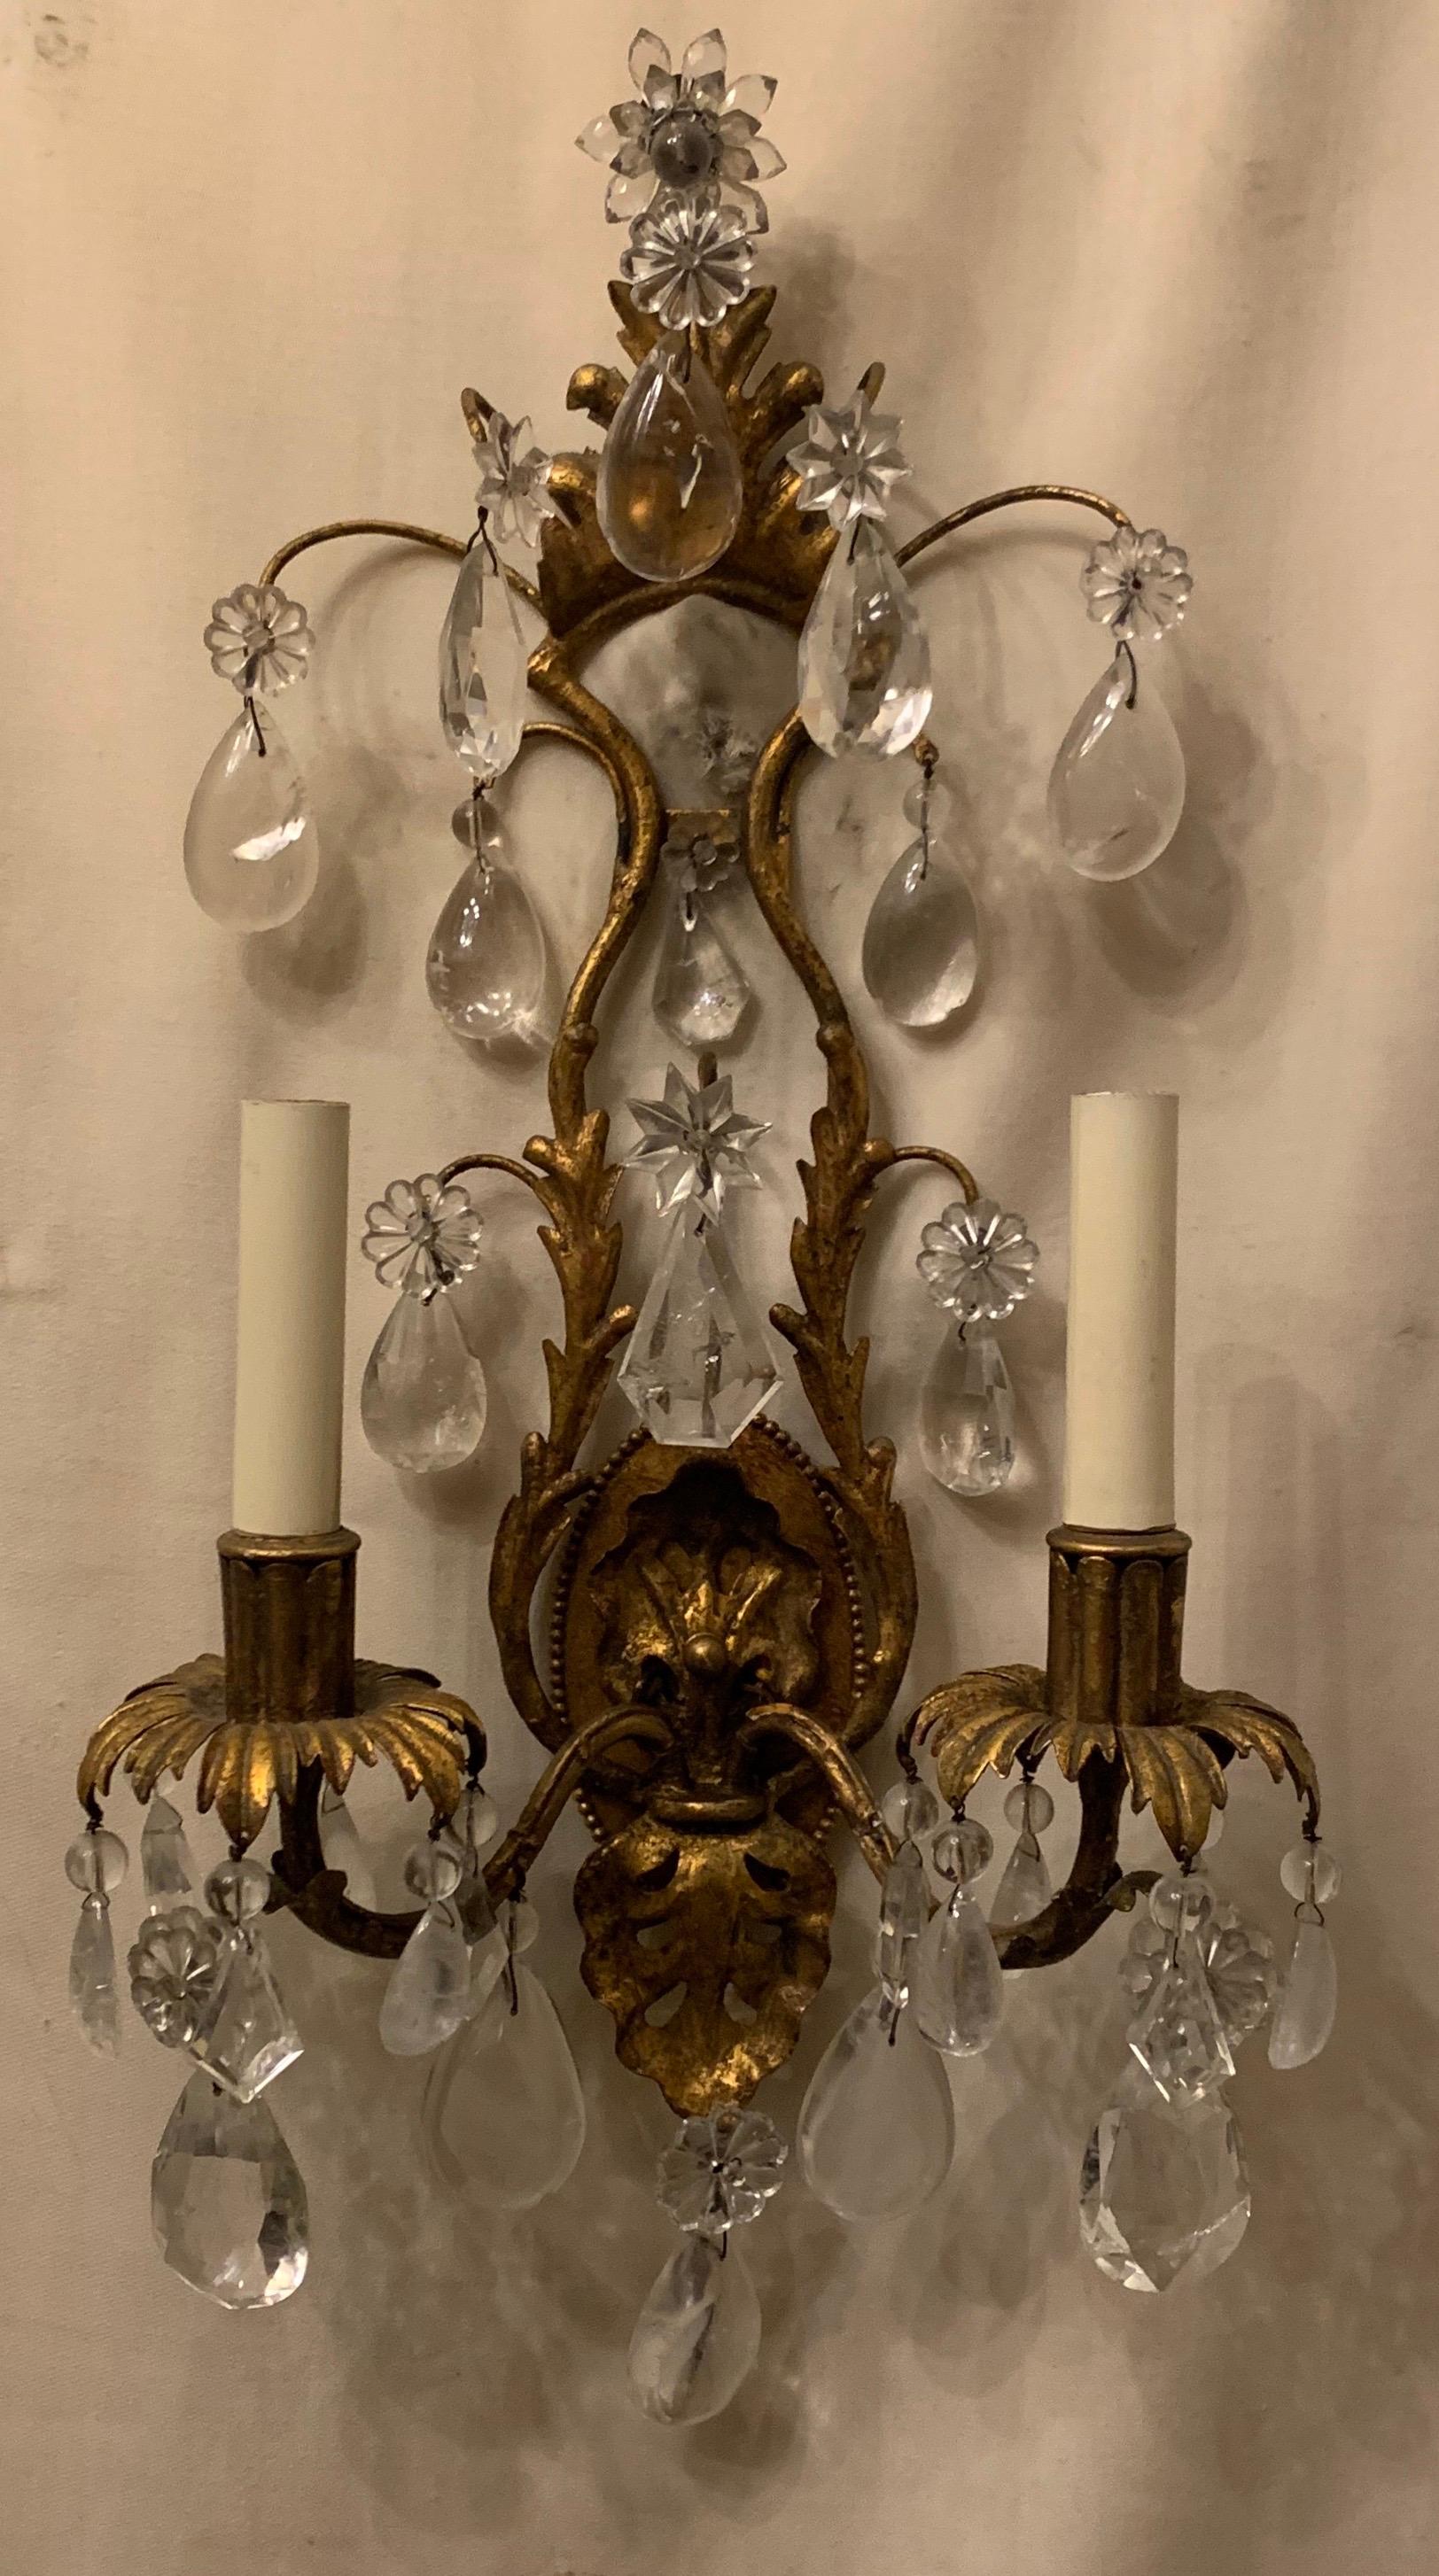 Vintage Pair of Maison Baguès Rock Crystal Gilt Tole Filigree Two-Light Sconces In Good Condition For Sale In Roslyn, NY